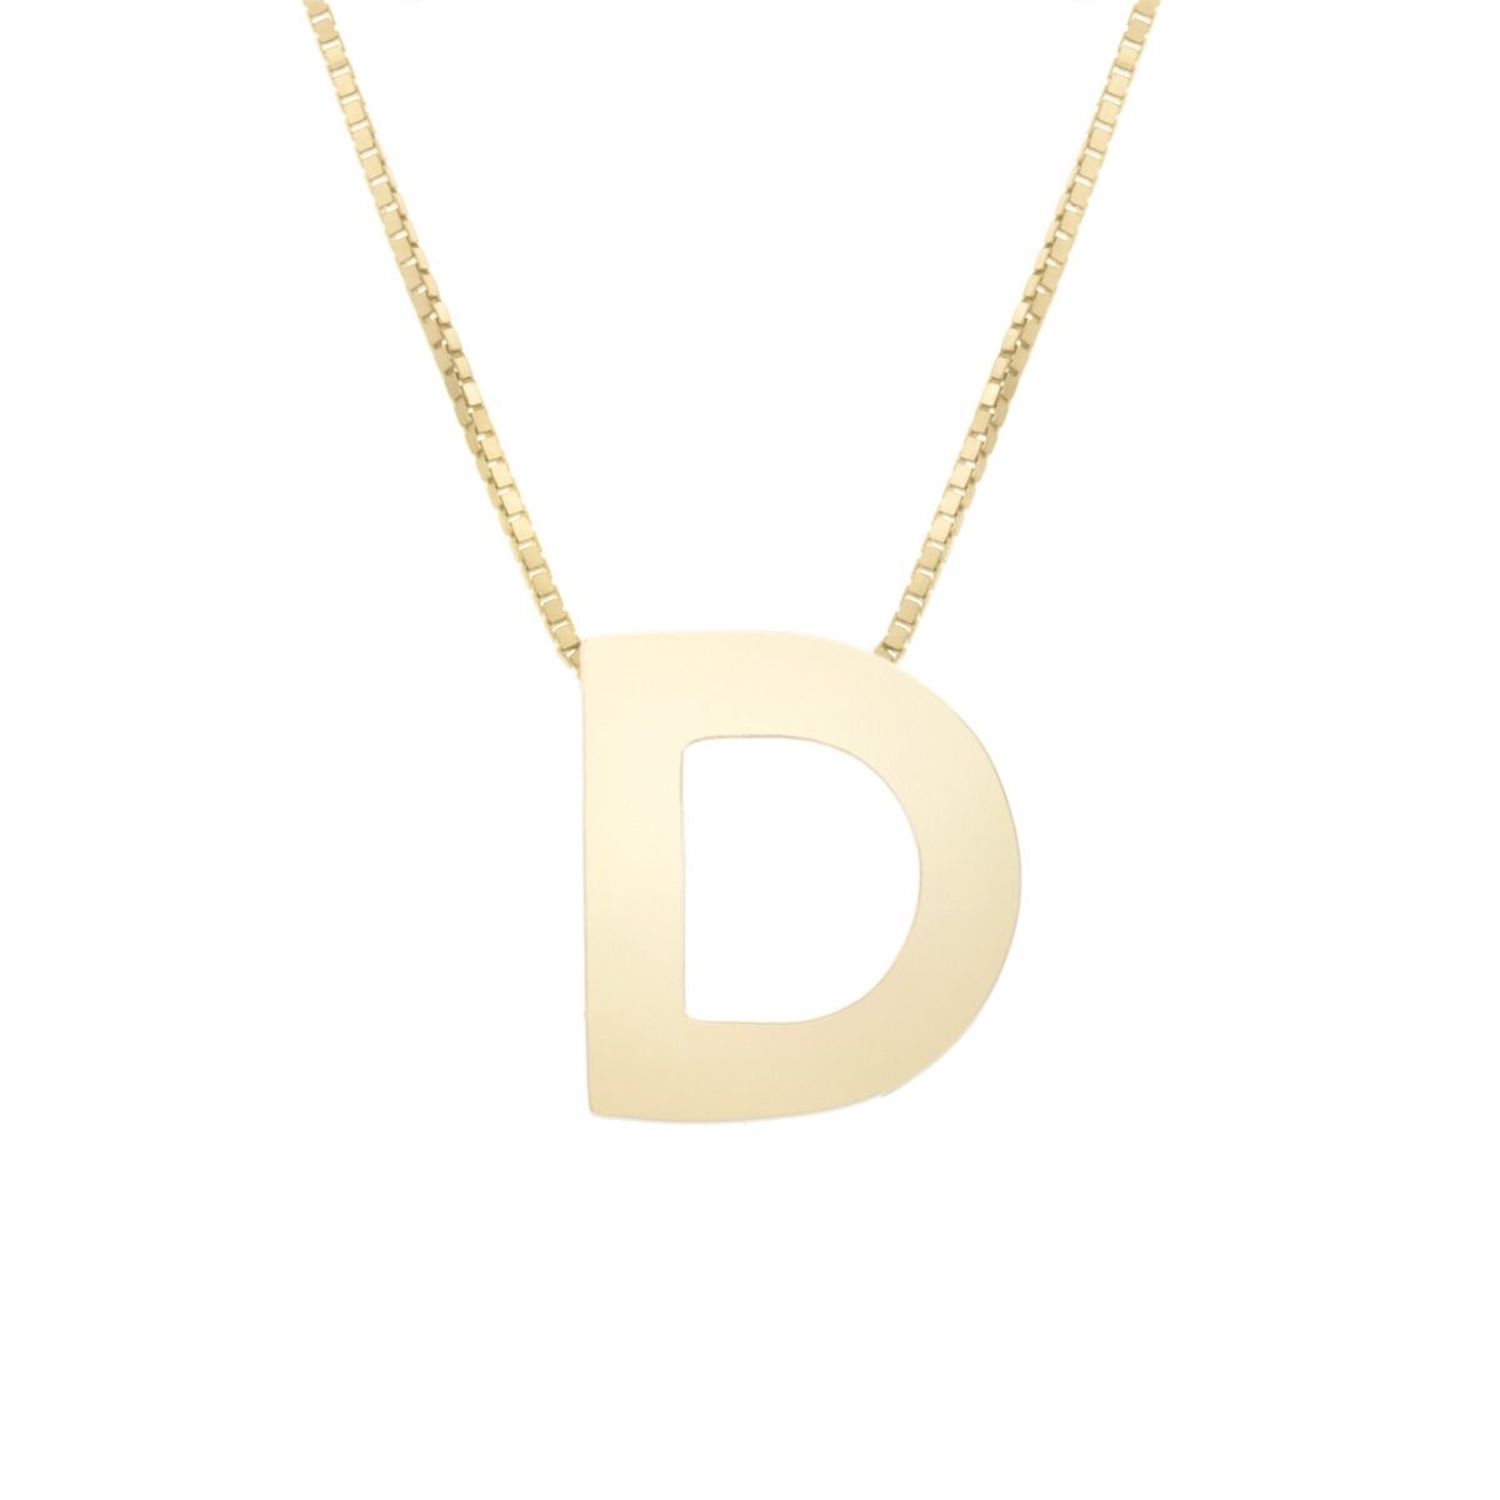 14K Yellow Gold Block Letter Initial Pendant Box Chain Necklace 16"-18" - D